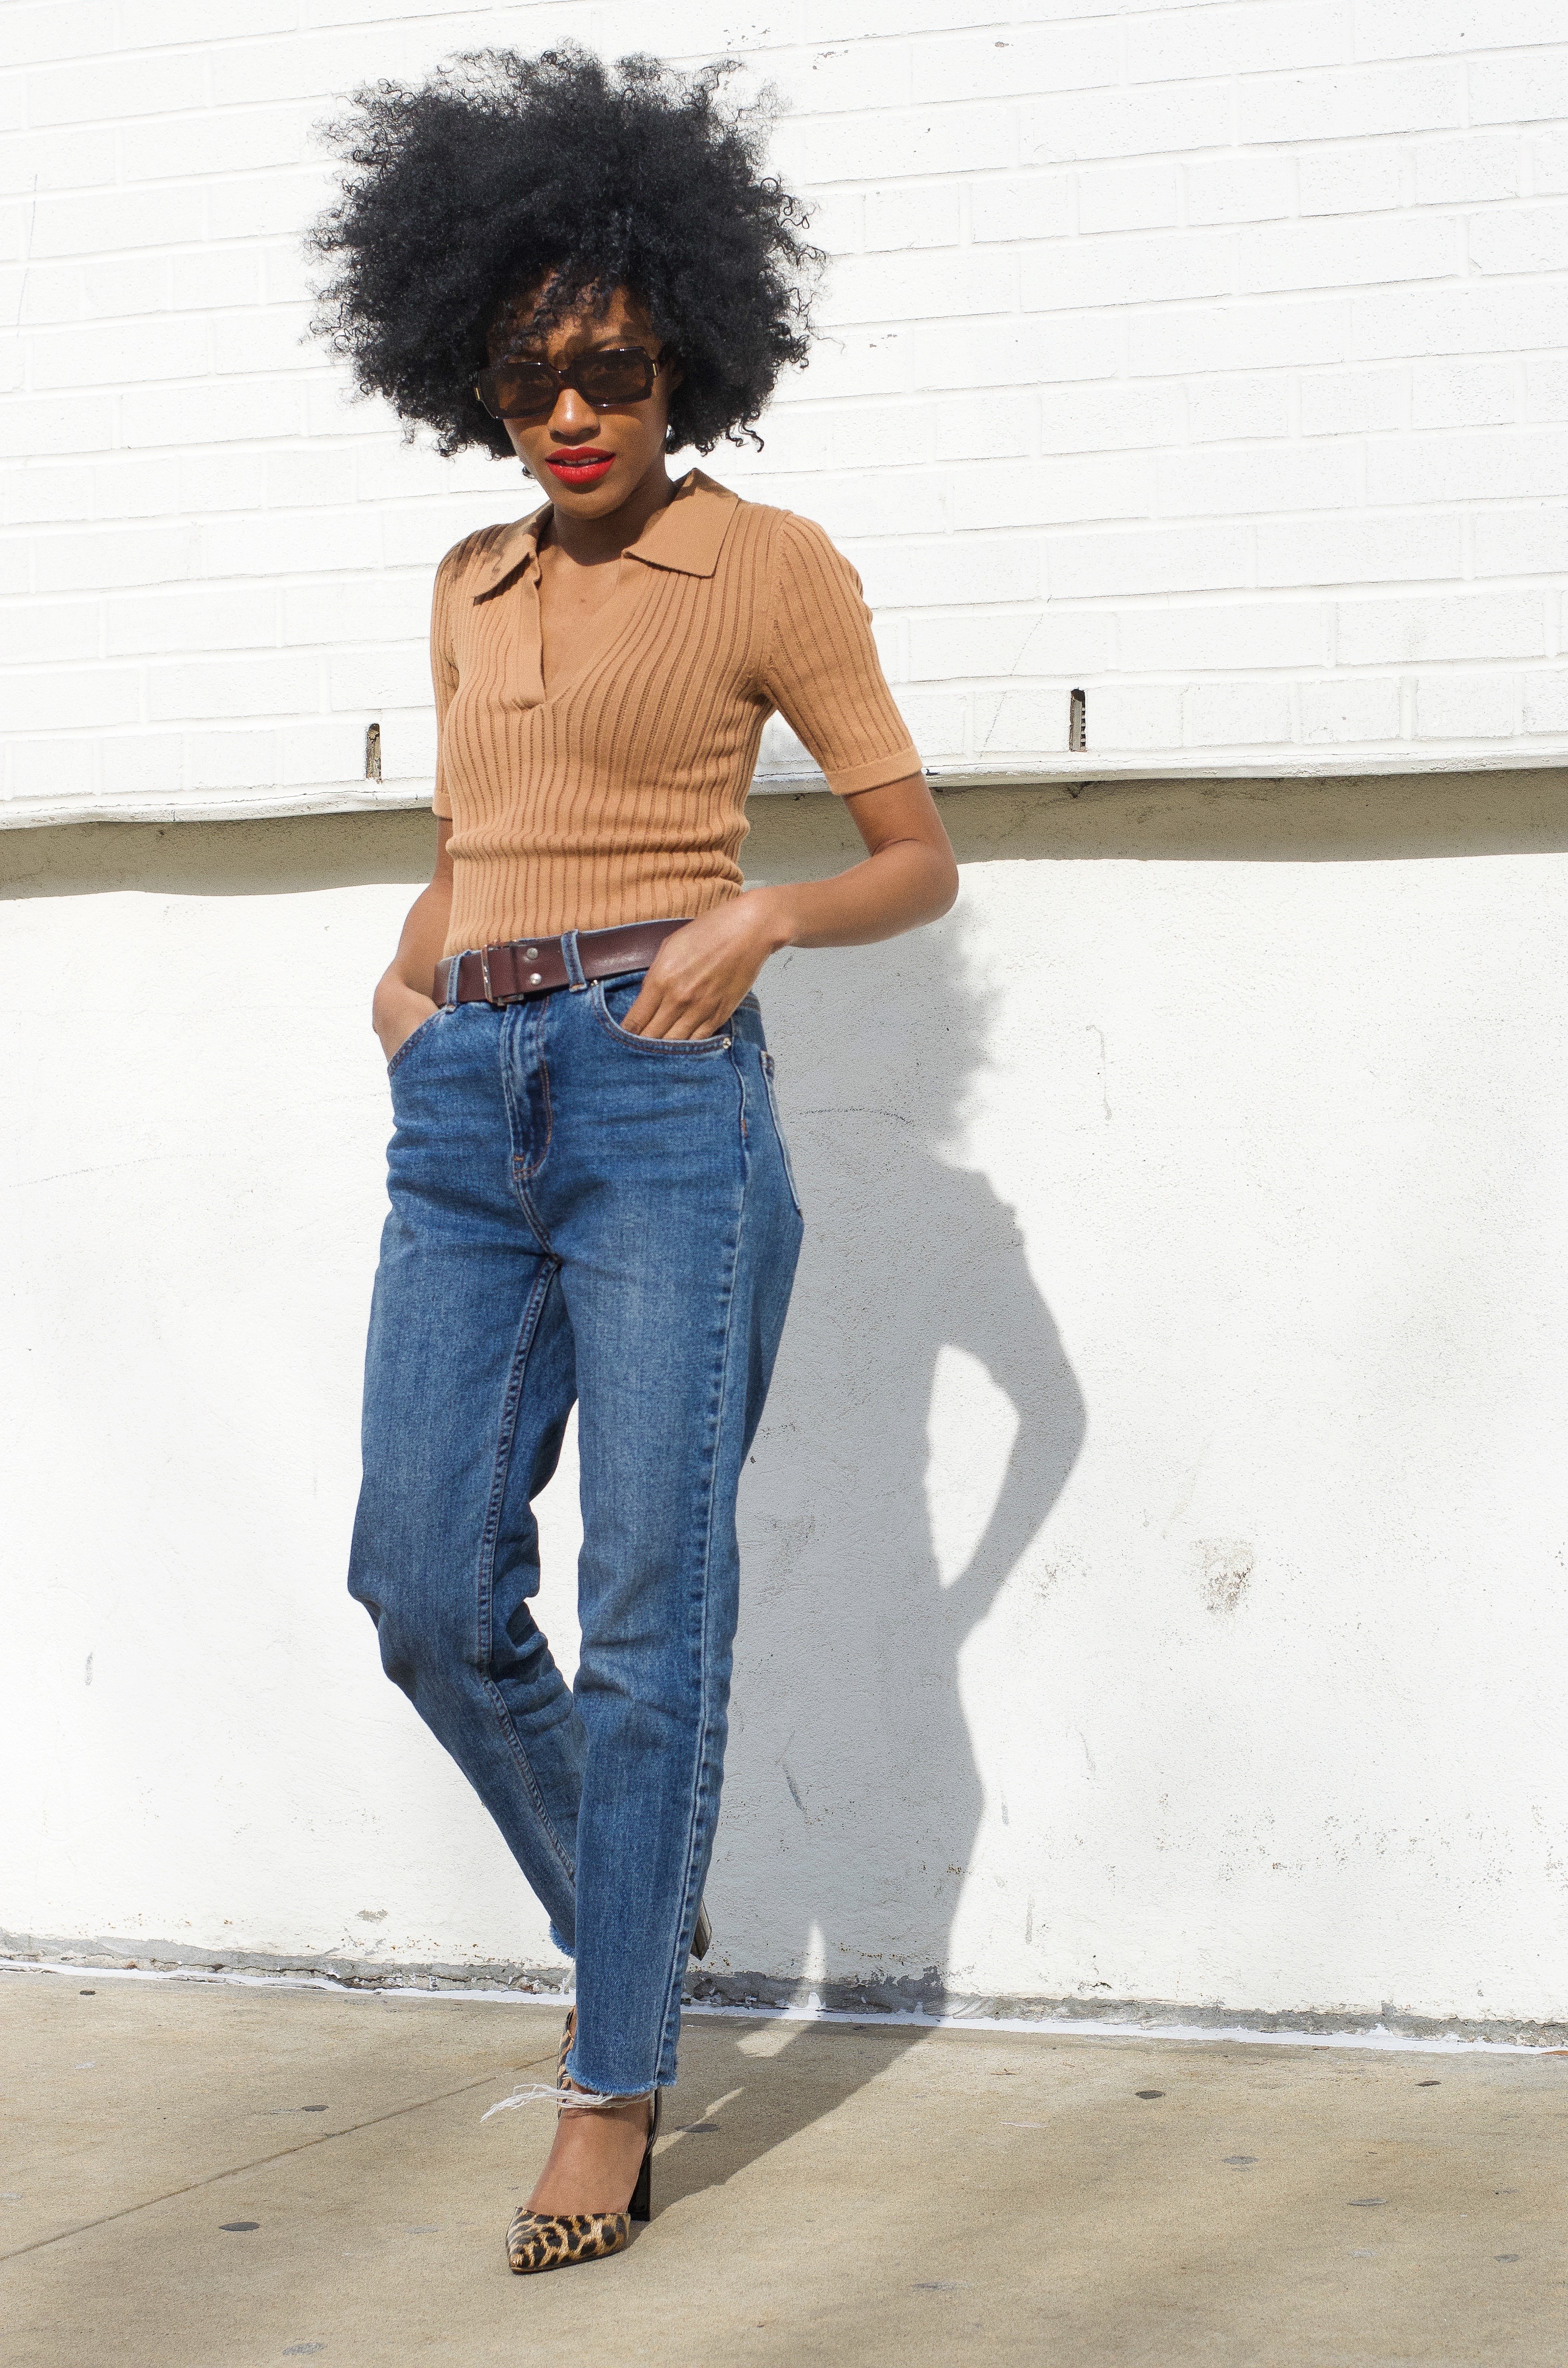 transitional spring pieces